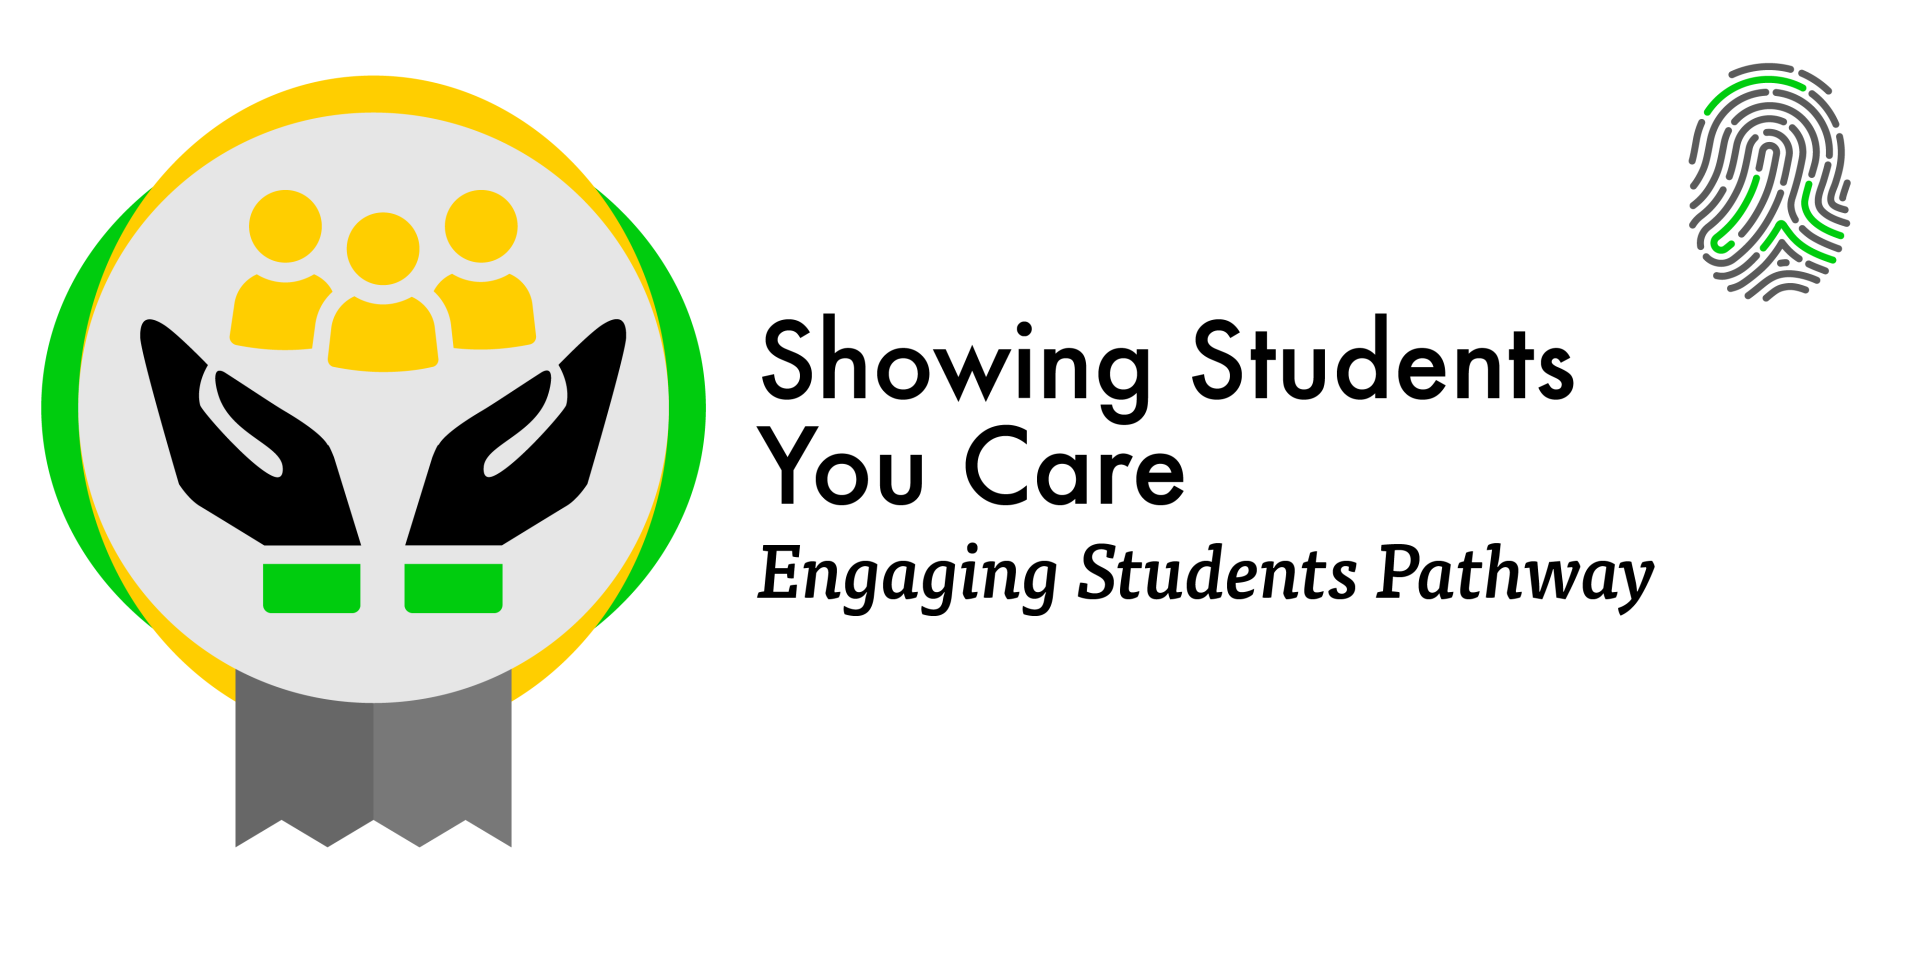 Showing Students You Care, Engaging Students Pathway